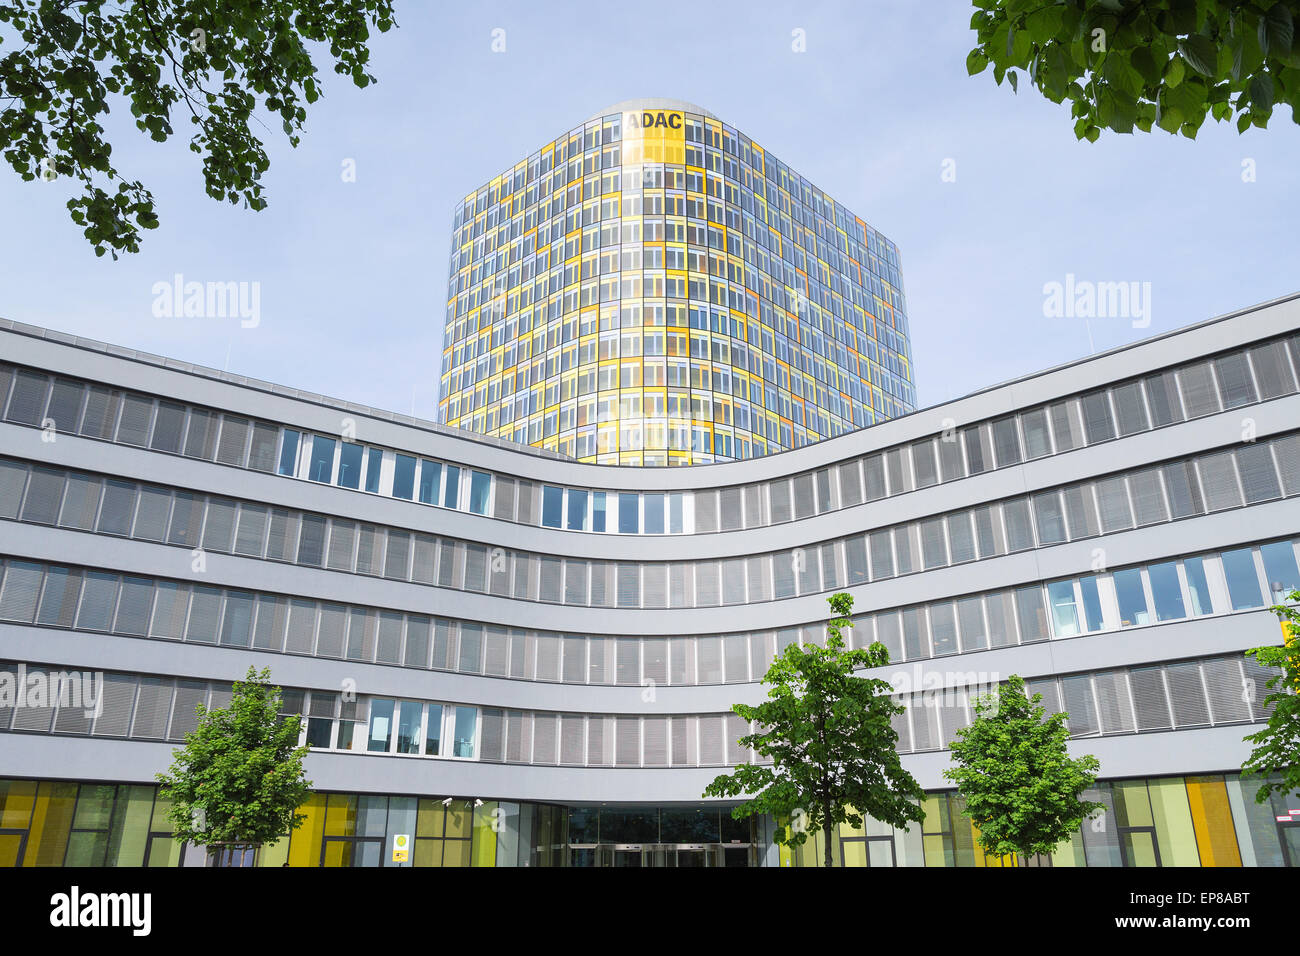 Facade of new modern ADAC headquarters and offices building. ADAC is the largest club for car owners in Europe. Stock Photo